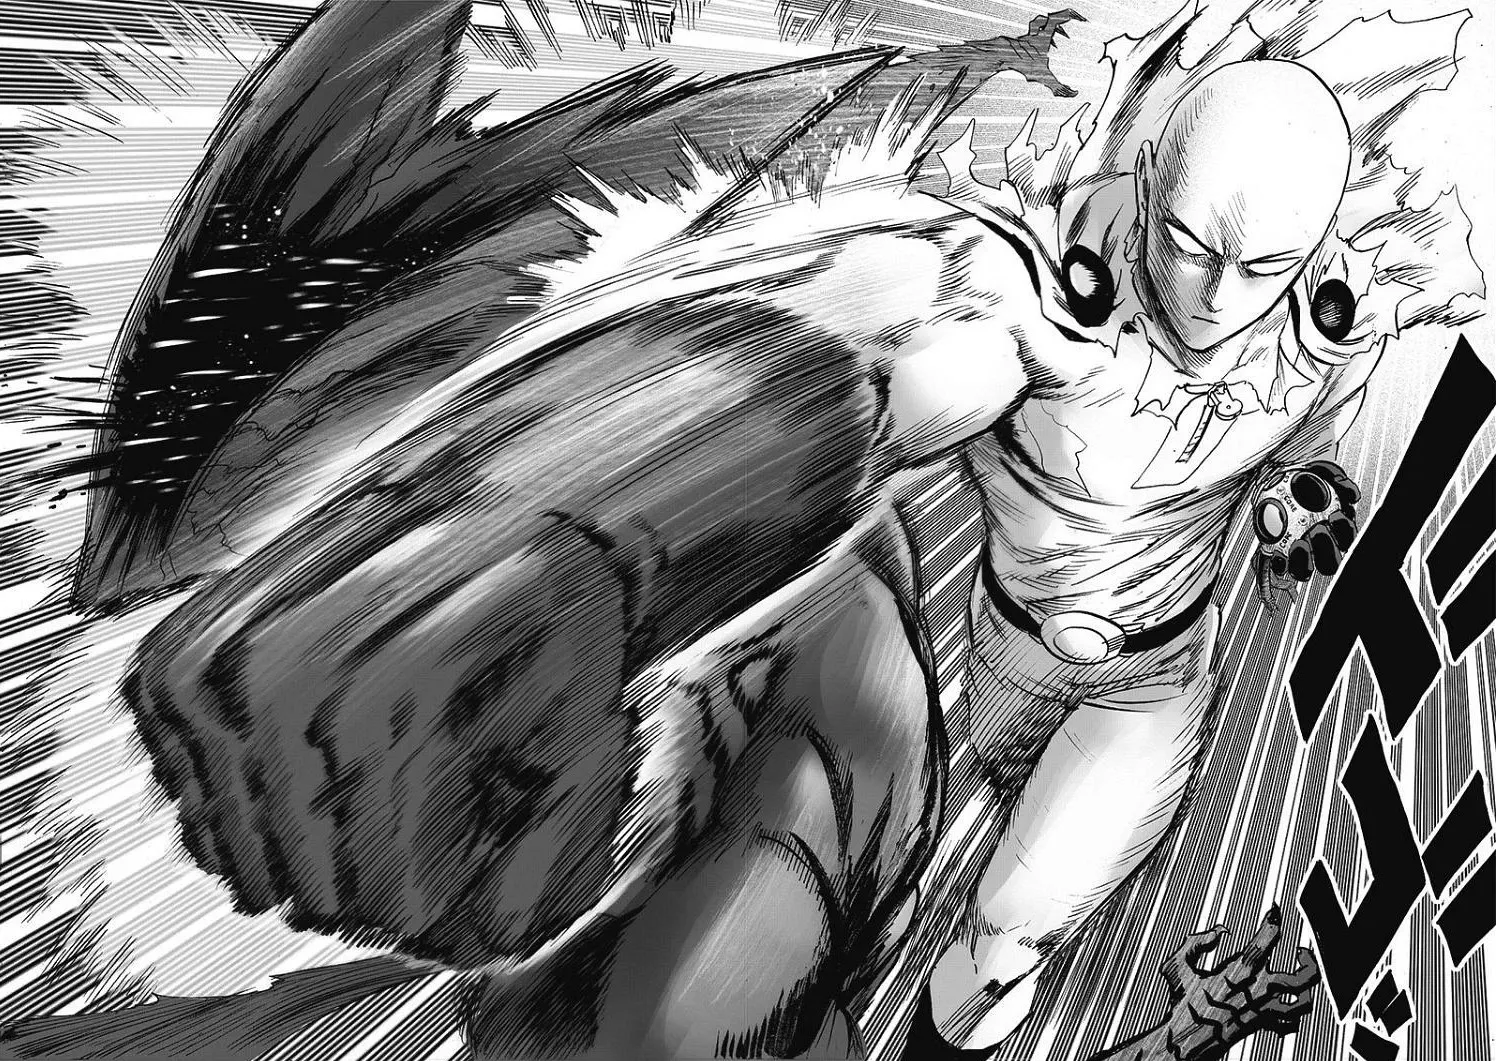 One-Punch Man Author Will Start A New Manga - Latest Anime News